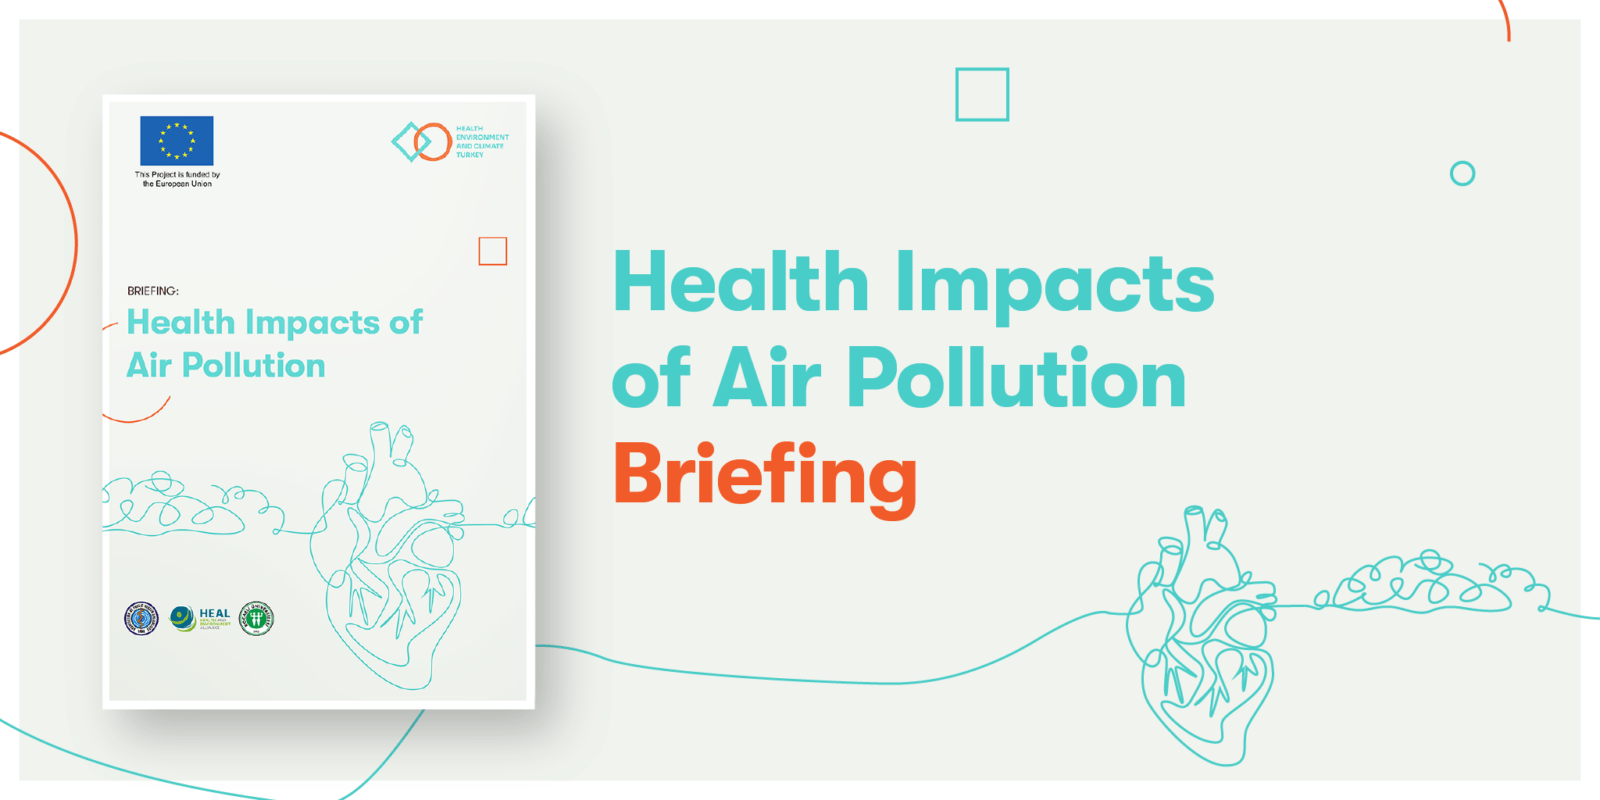 Recommendations from the Turkish health sector on improving air quality